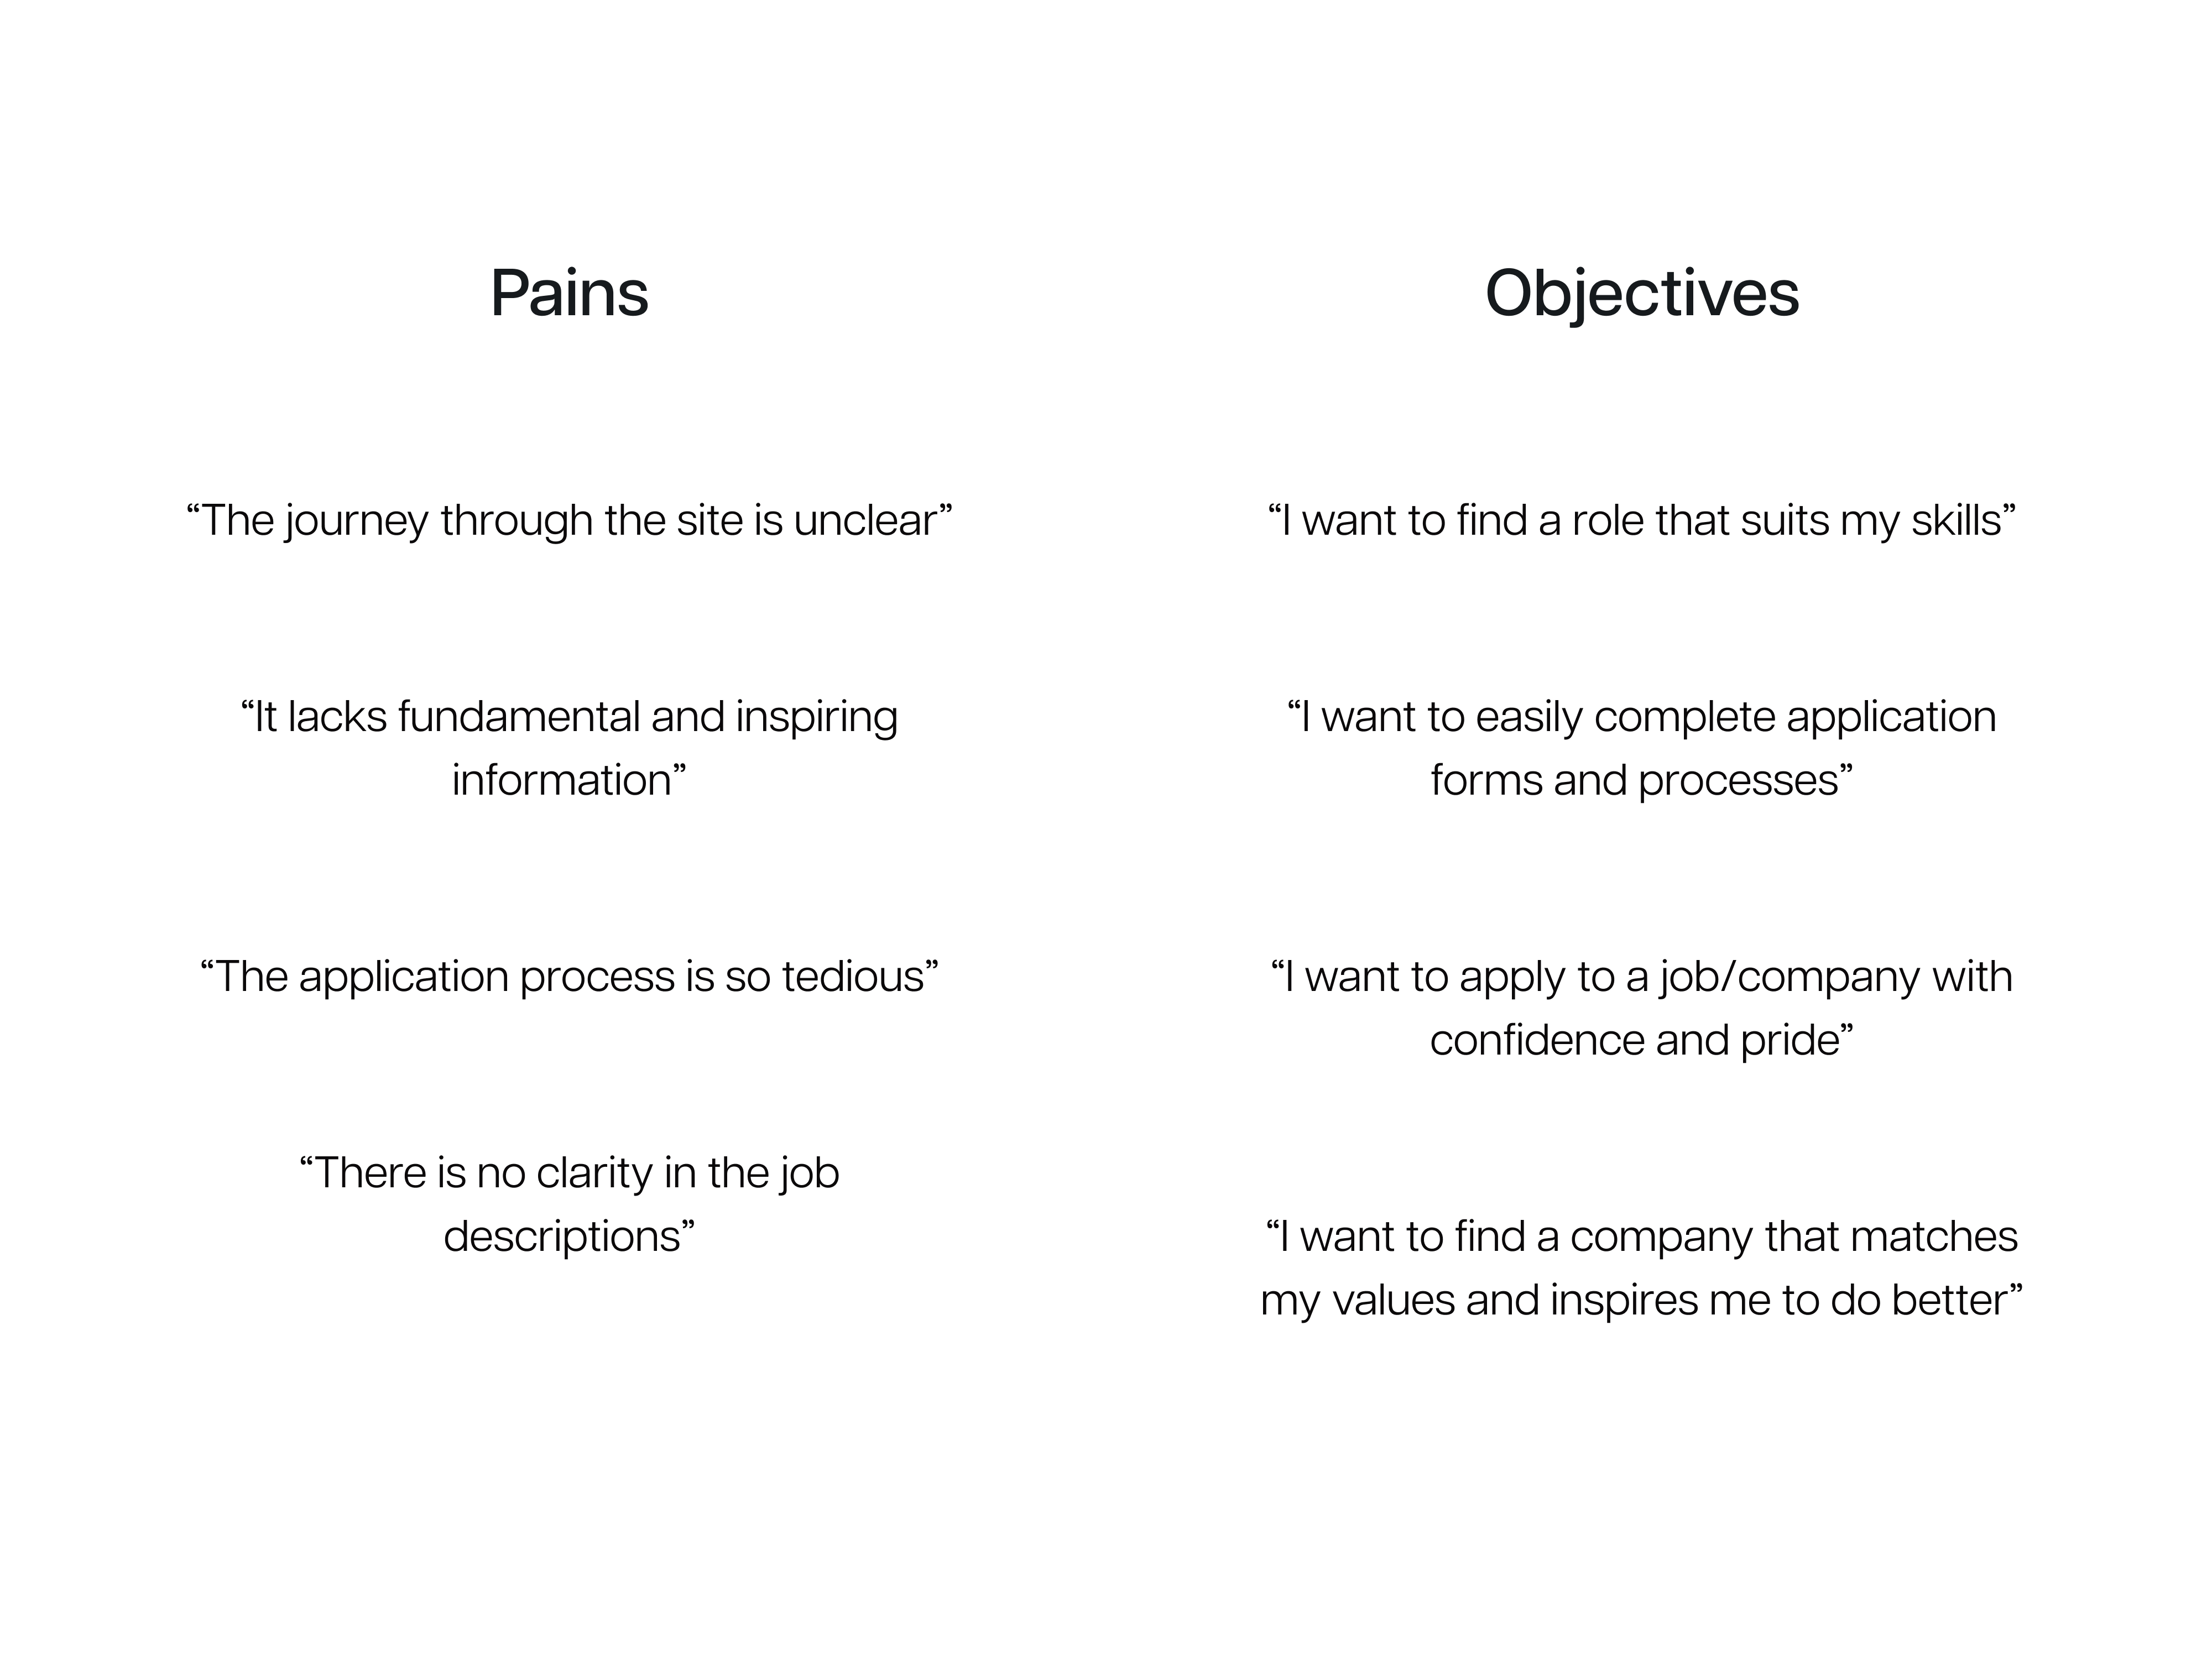 Pains & Objectives Graphic